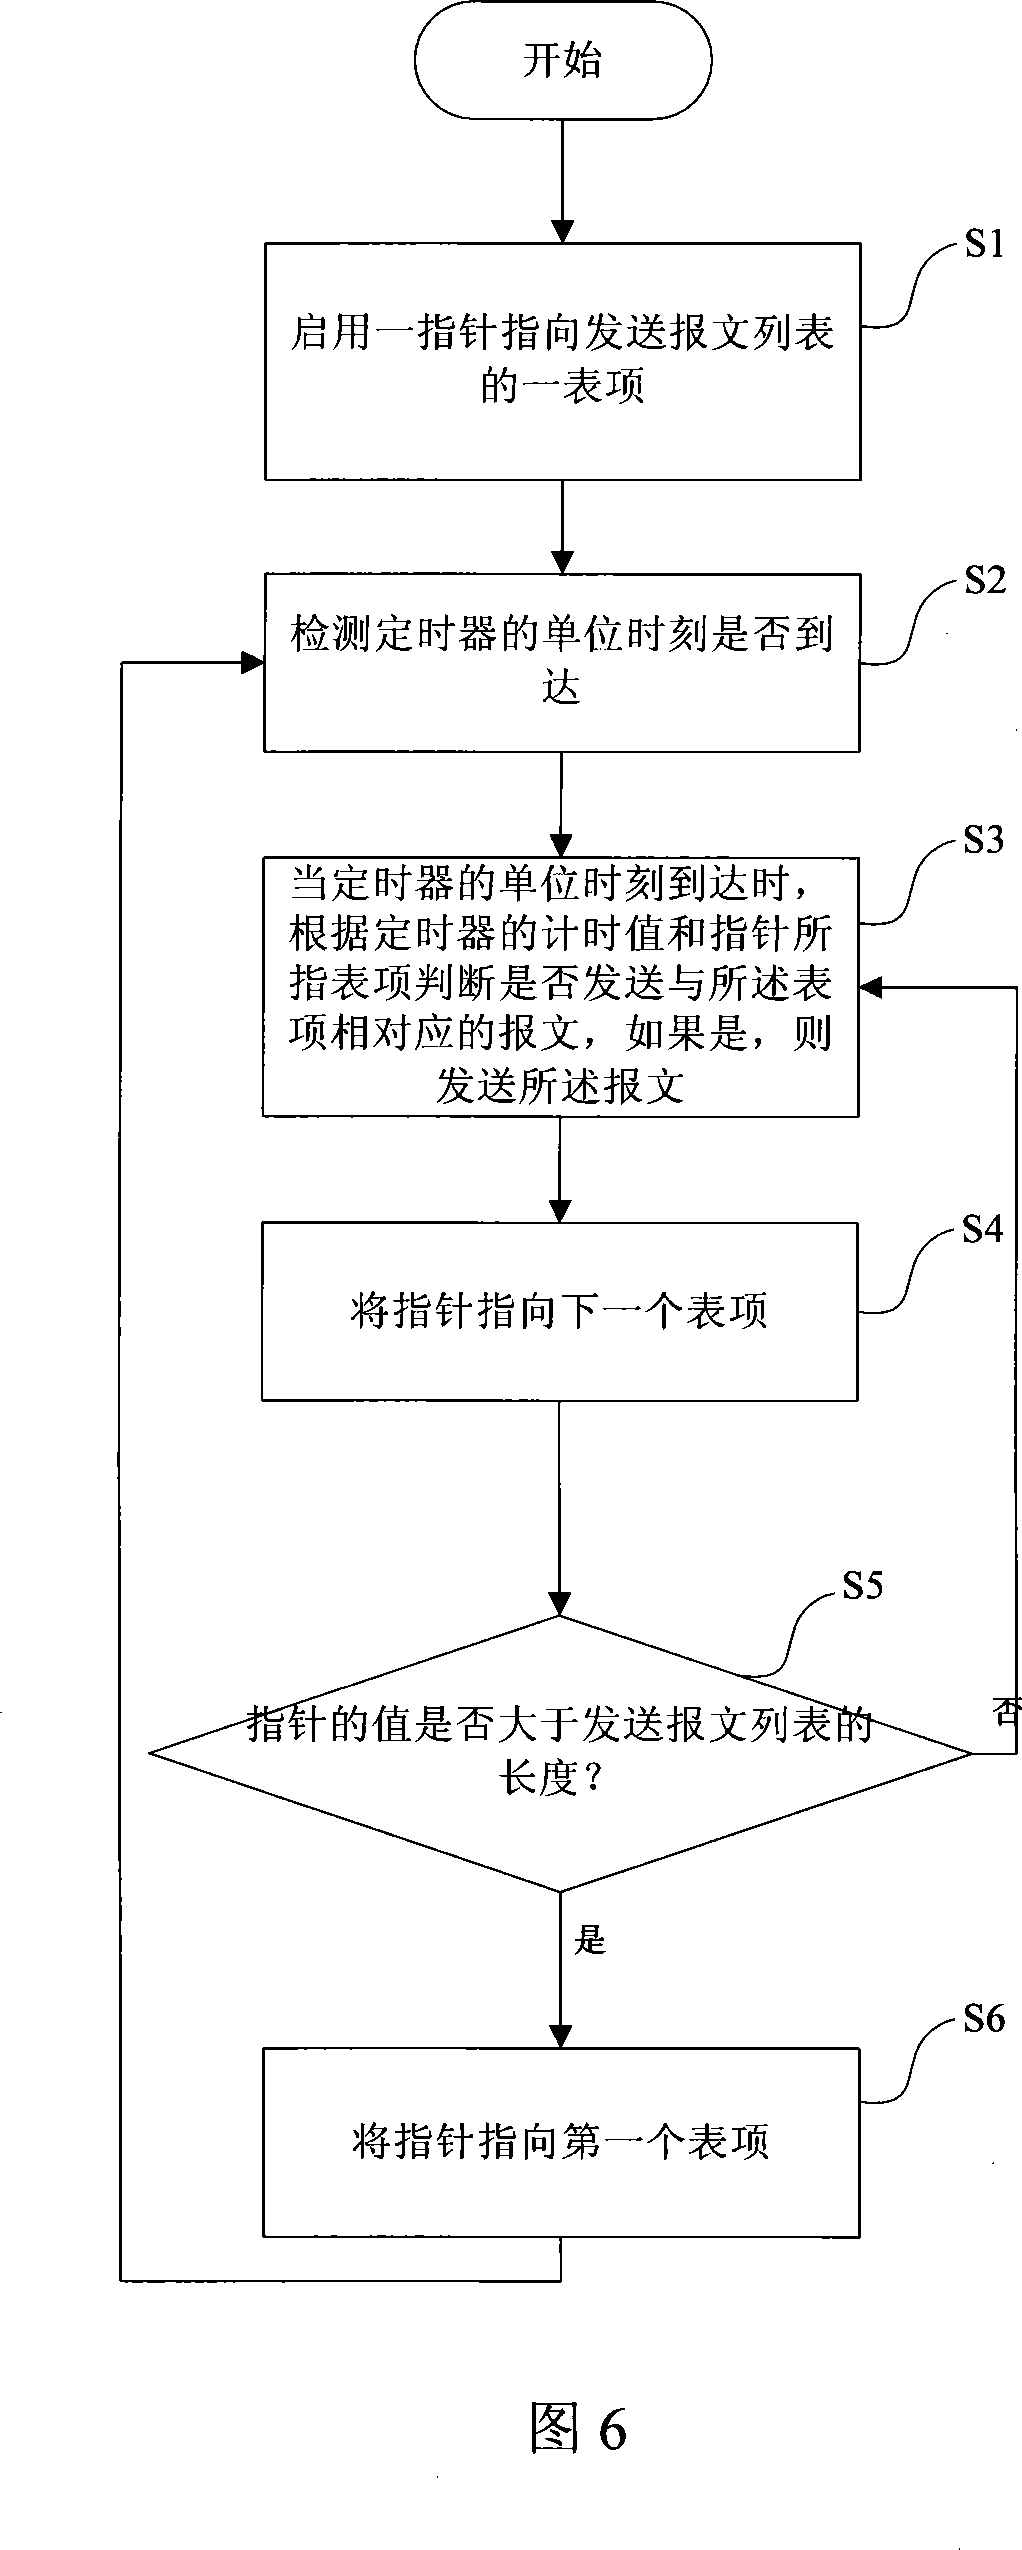 Timing transmission packet method and packet transmission module